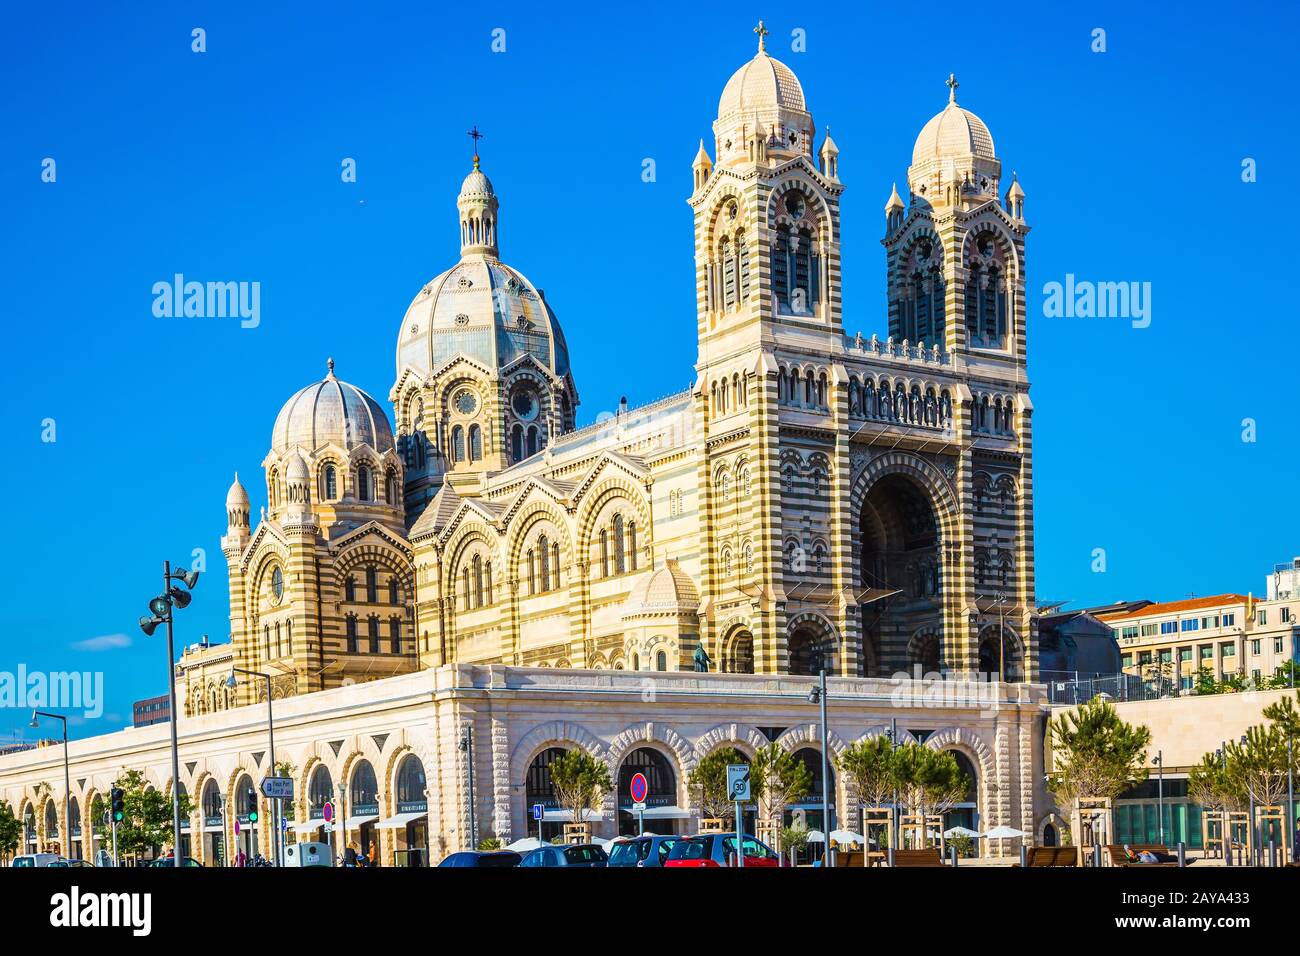 The agnificent Cathedral of Saint Mary Major Stock Photo